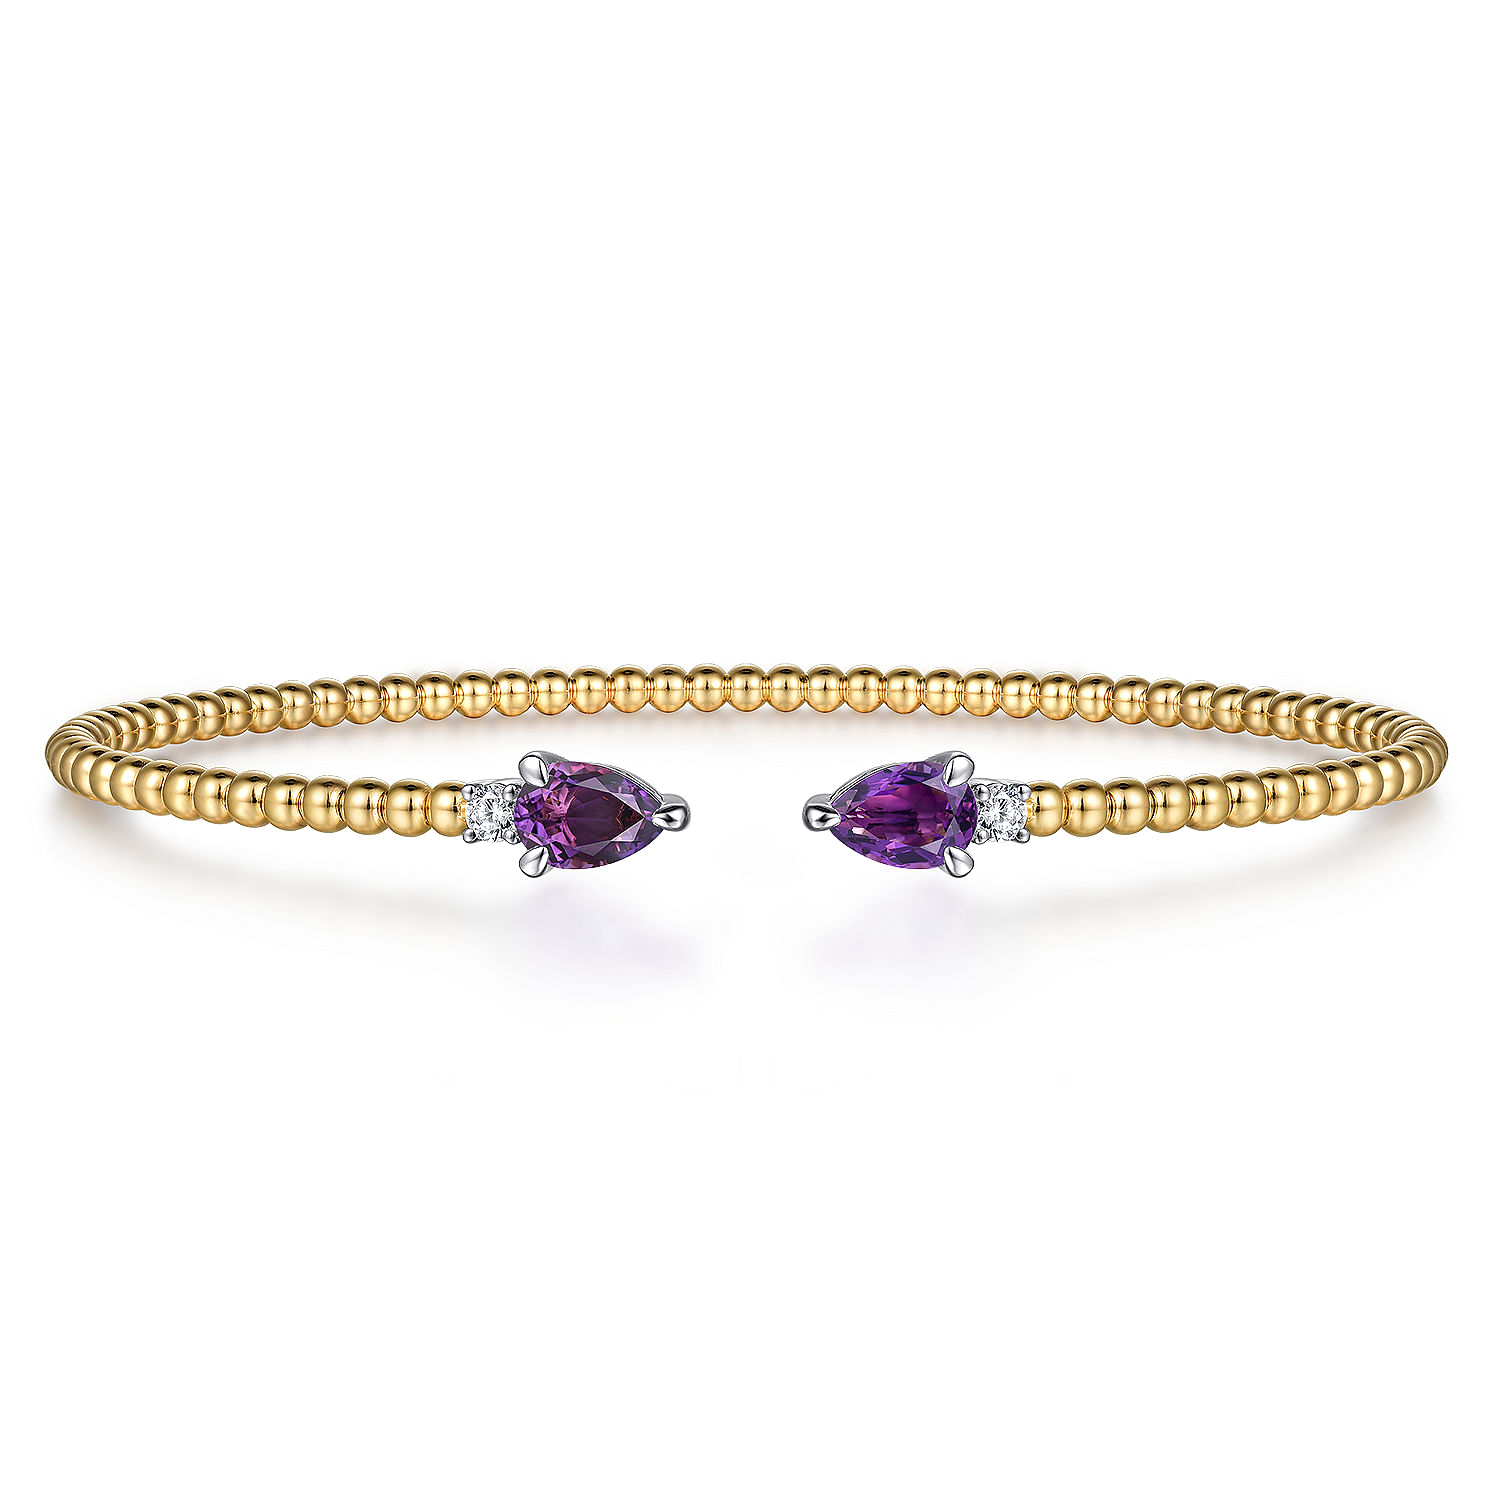 14K White & Yellow Gold Bujukan Open Cuff Bracelet with Amethyst and Diamond End Caps